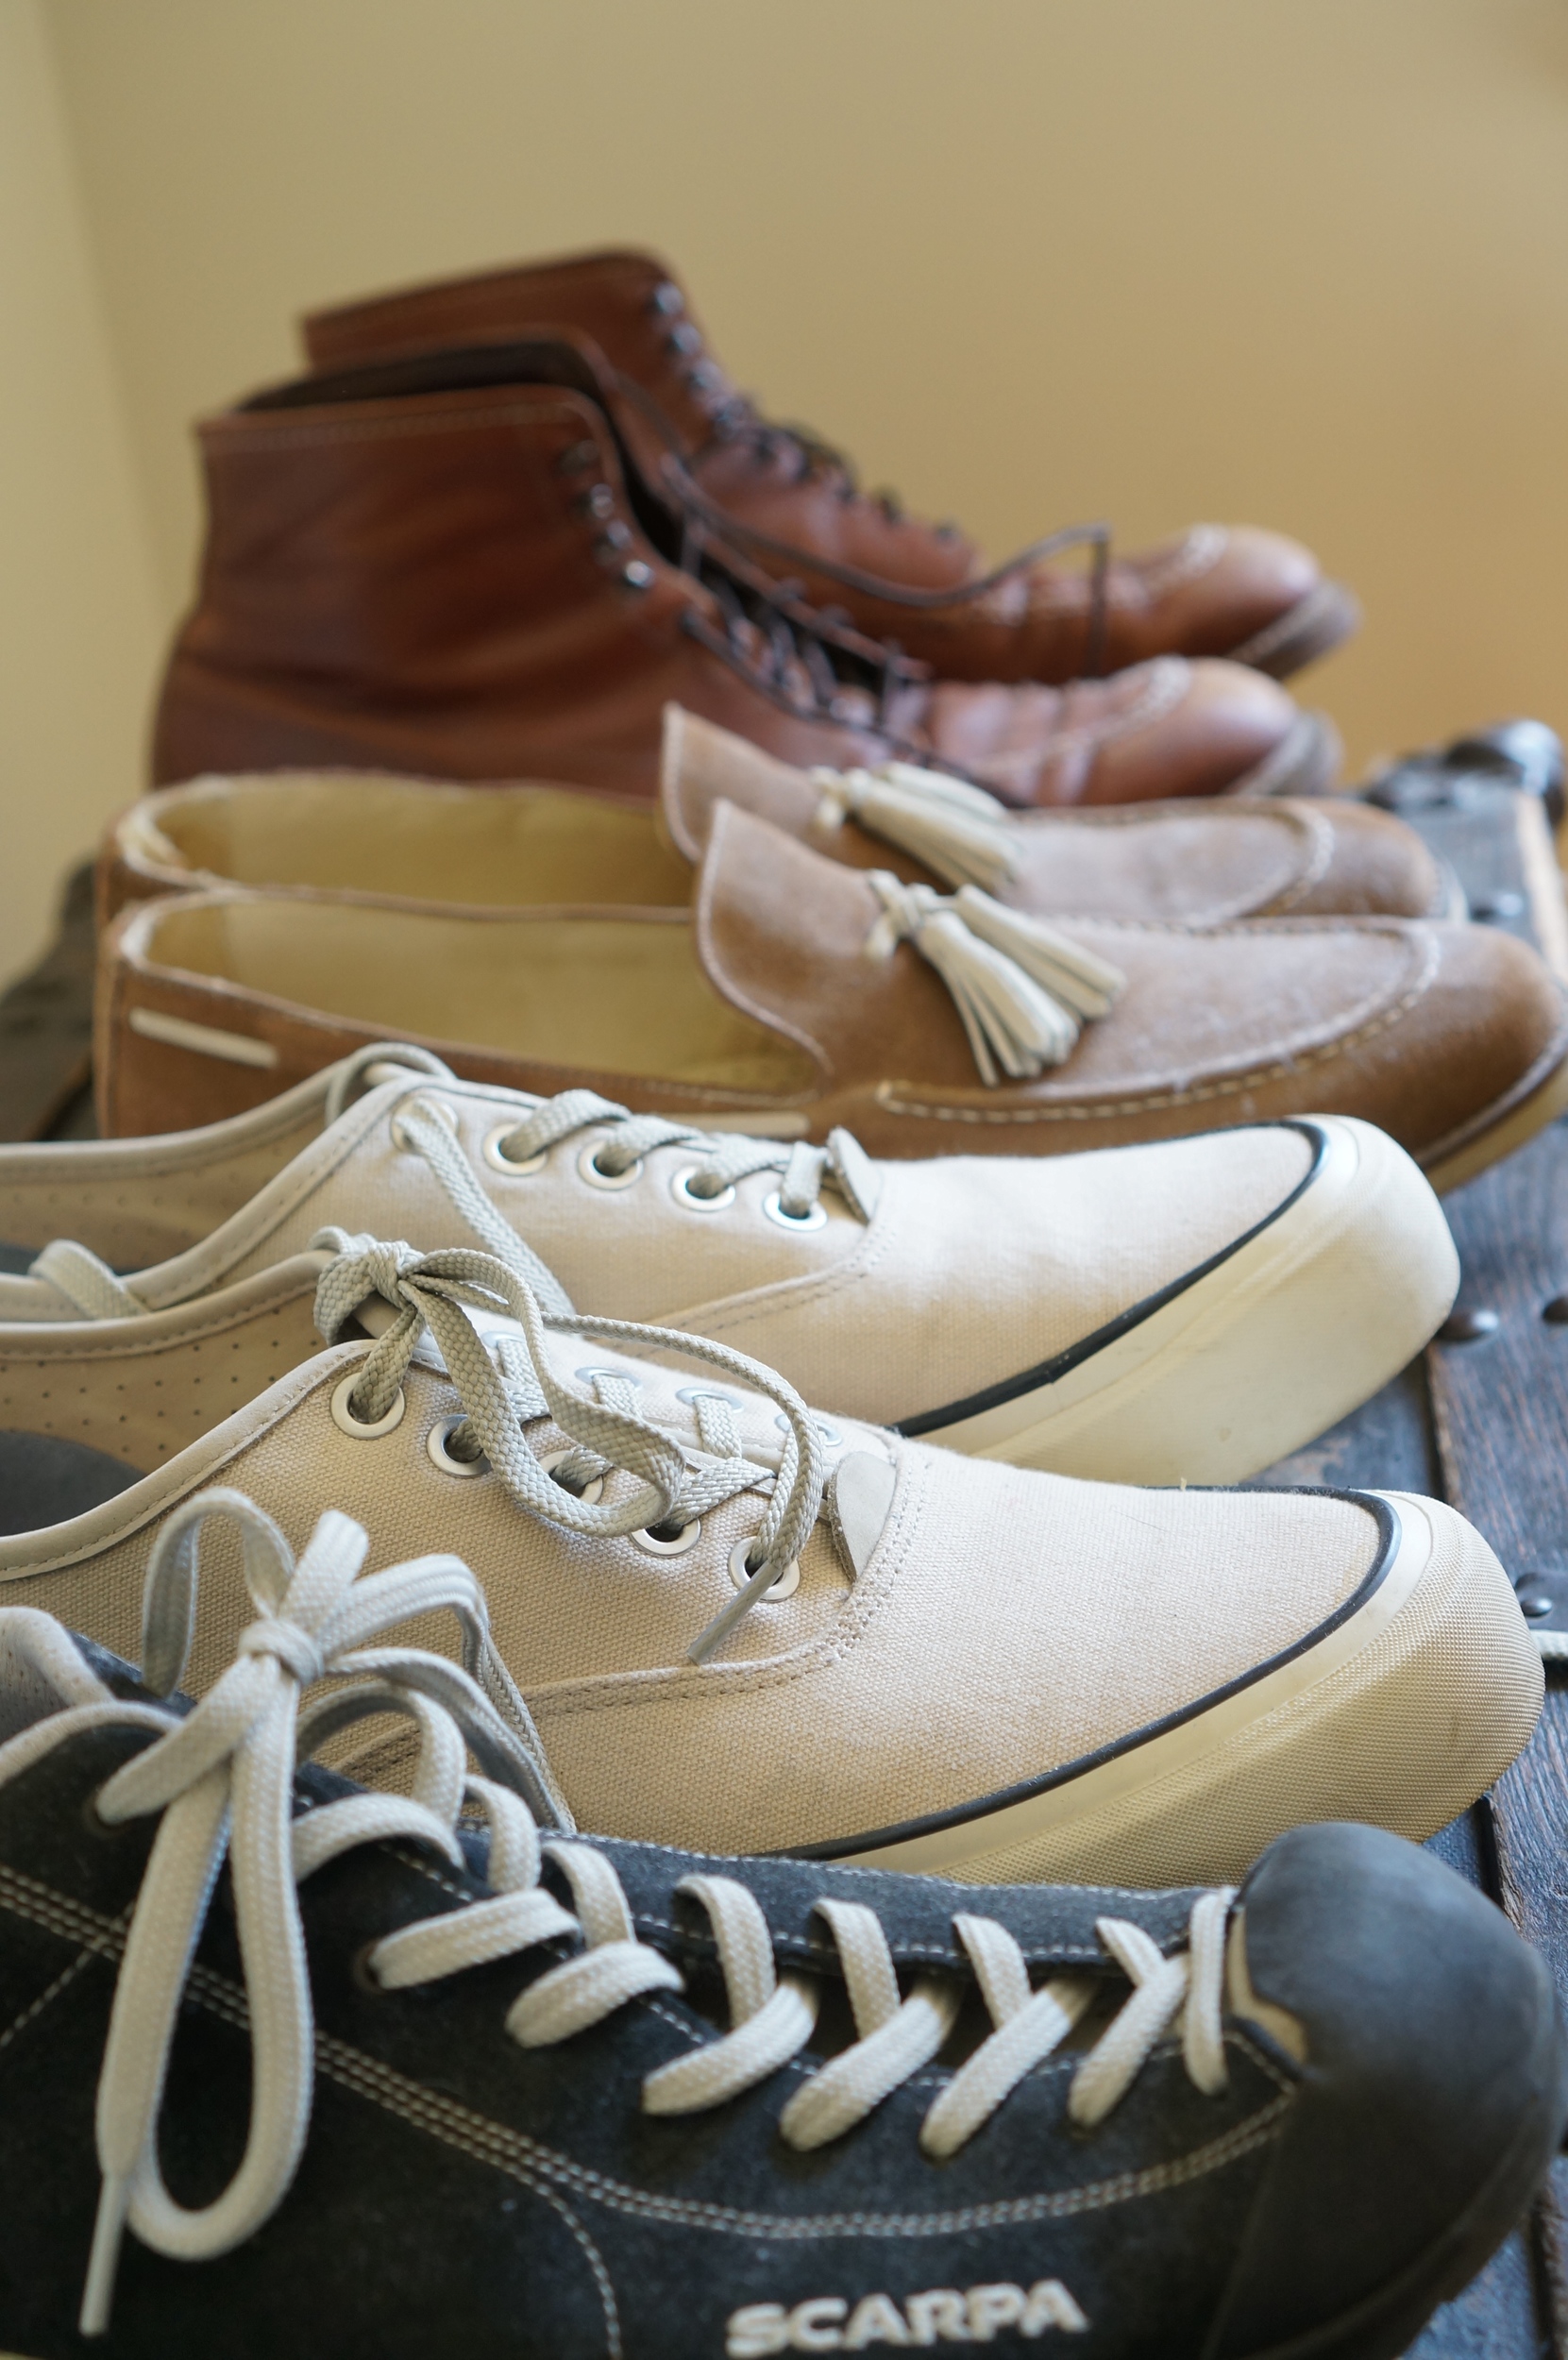 Travel Shoes Reviewed for Europe vacations